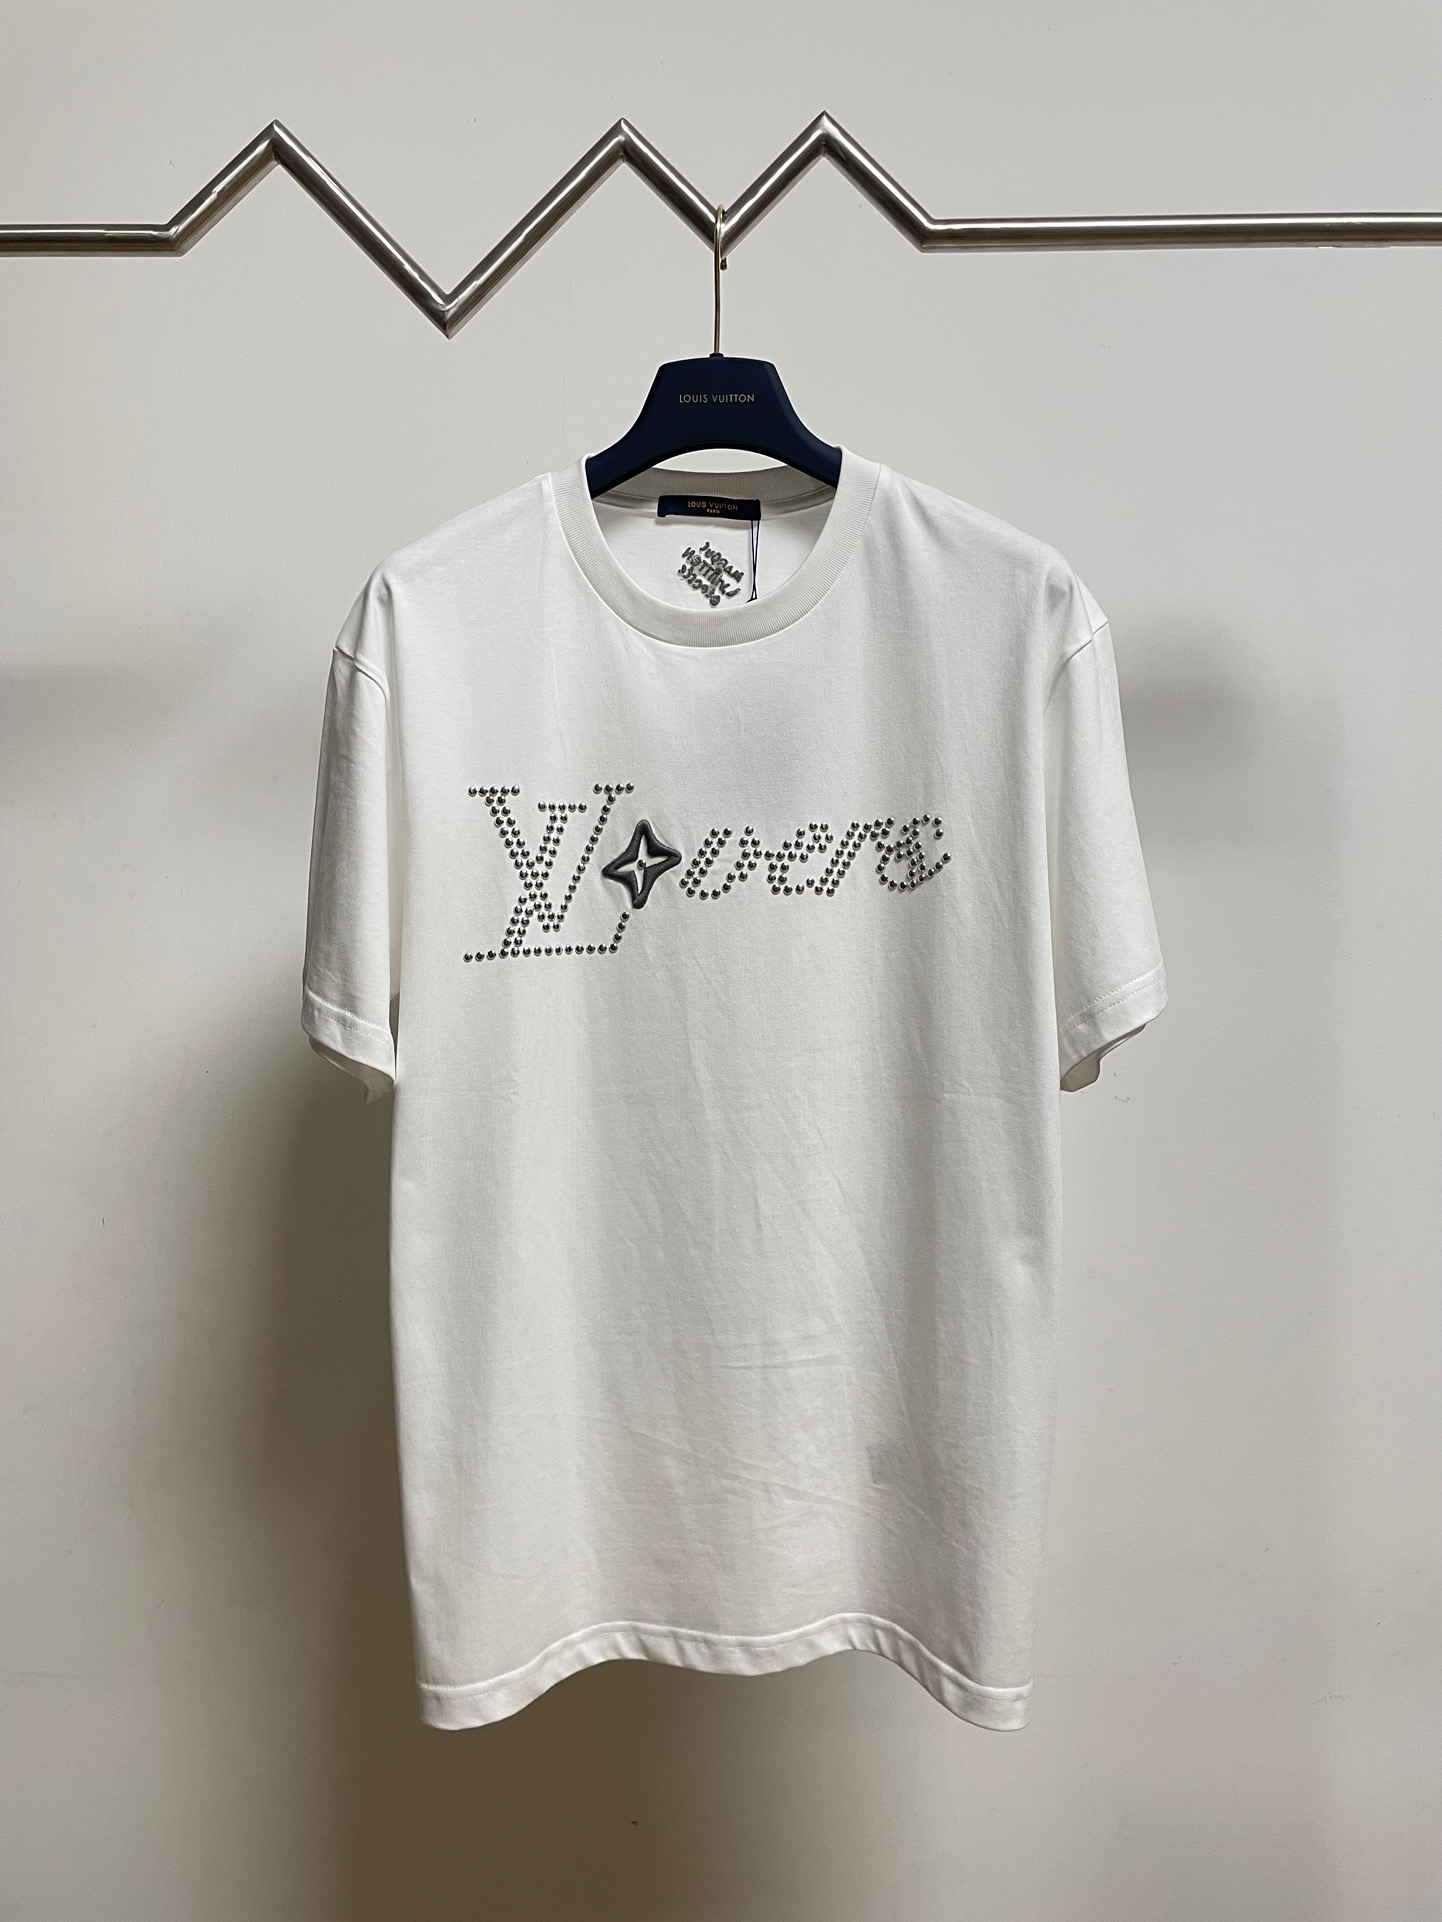 Louis Vuitton Clothing T-Shirt AAAA Customize
 White Rivets Unisex Cotton Spring/Summer Collection Short Sleeve